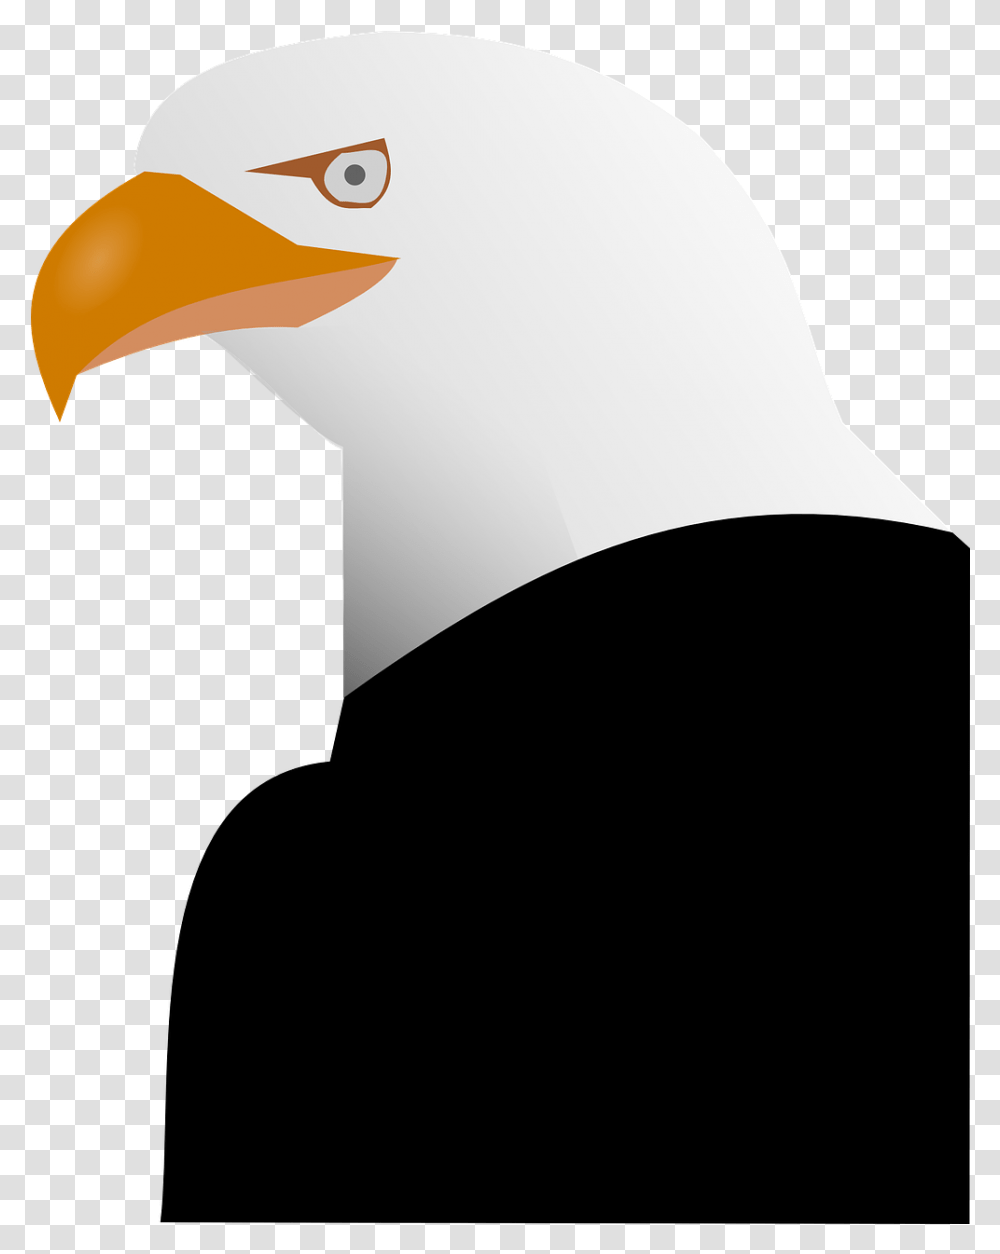 Eagle Animal Beak Bald Feather Spread Icon, Bird, Fowl, Poultry, Vulture Transparent Png